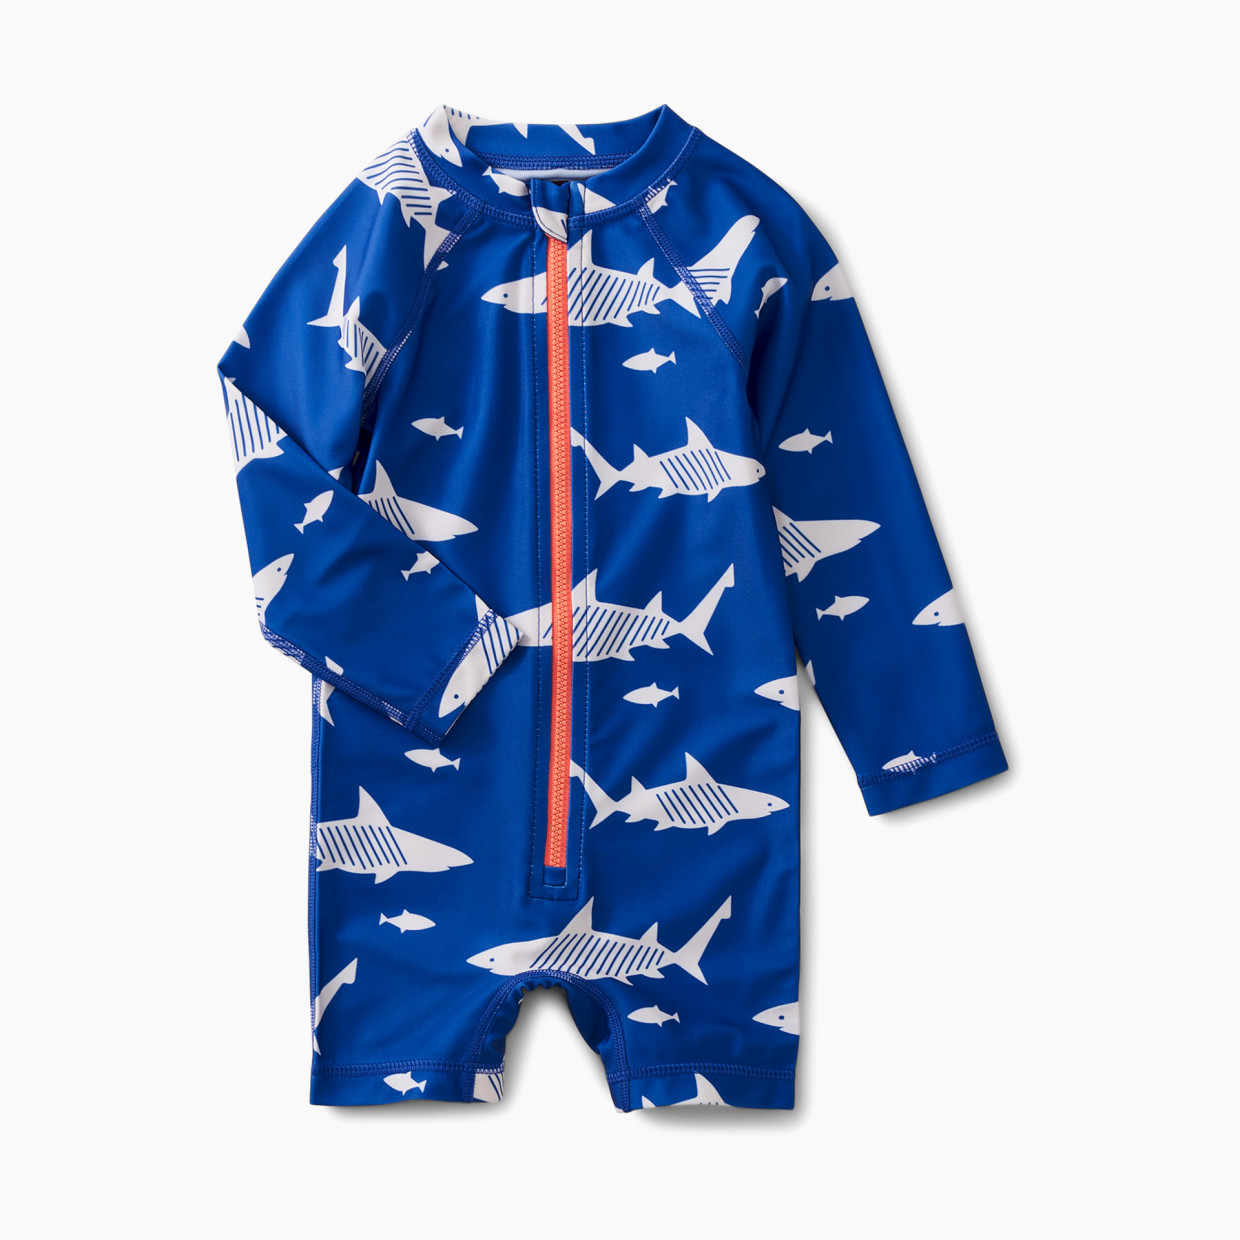 Tea Collection Rash Guard Swimsuit - Great White Sharks In Blue, 3-6 Months.